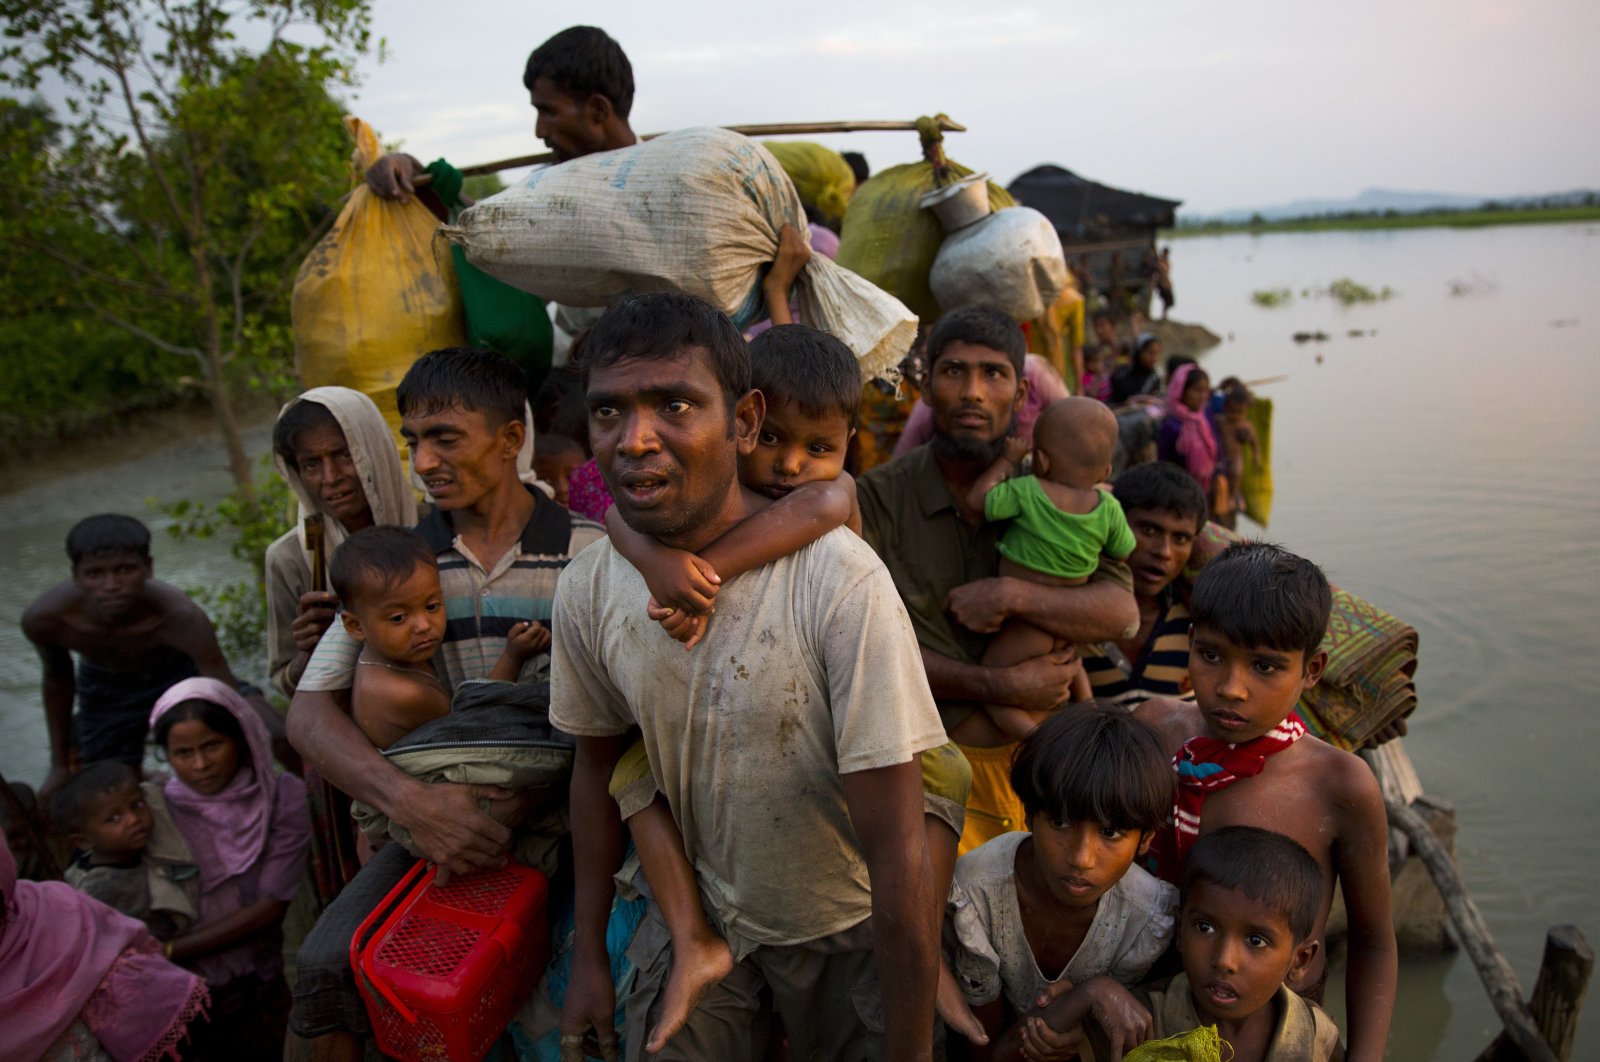 Rohingya Muslims carry their young children and belongings after crossing the border from Myanmar into Bangladesh, near Palong Khali, Bangladesh, Nov. 1, 2017. (AP Photo)